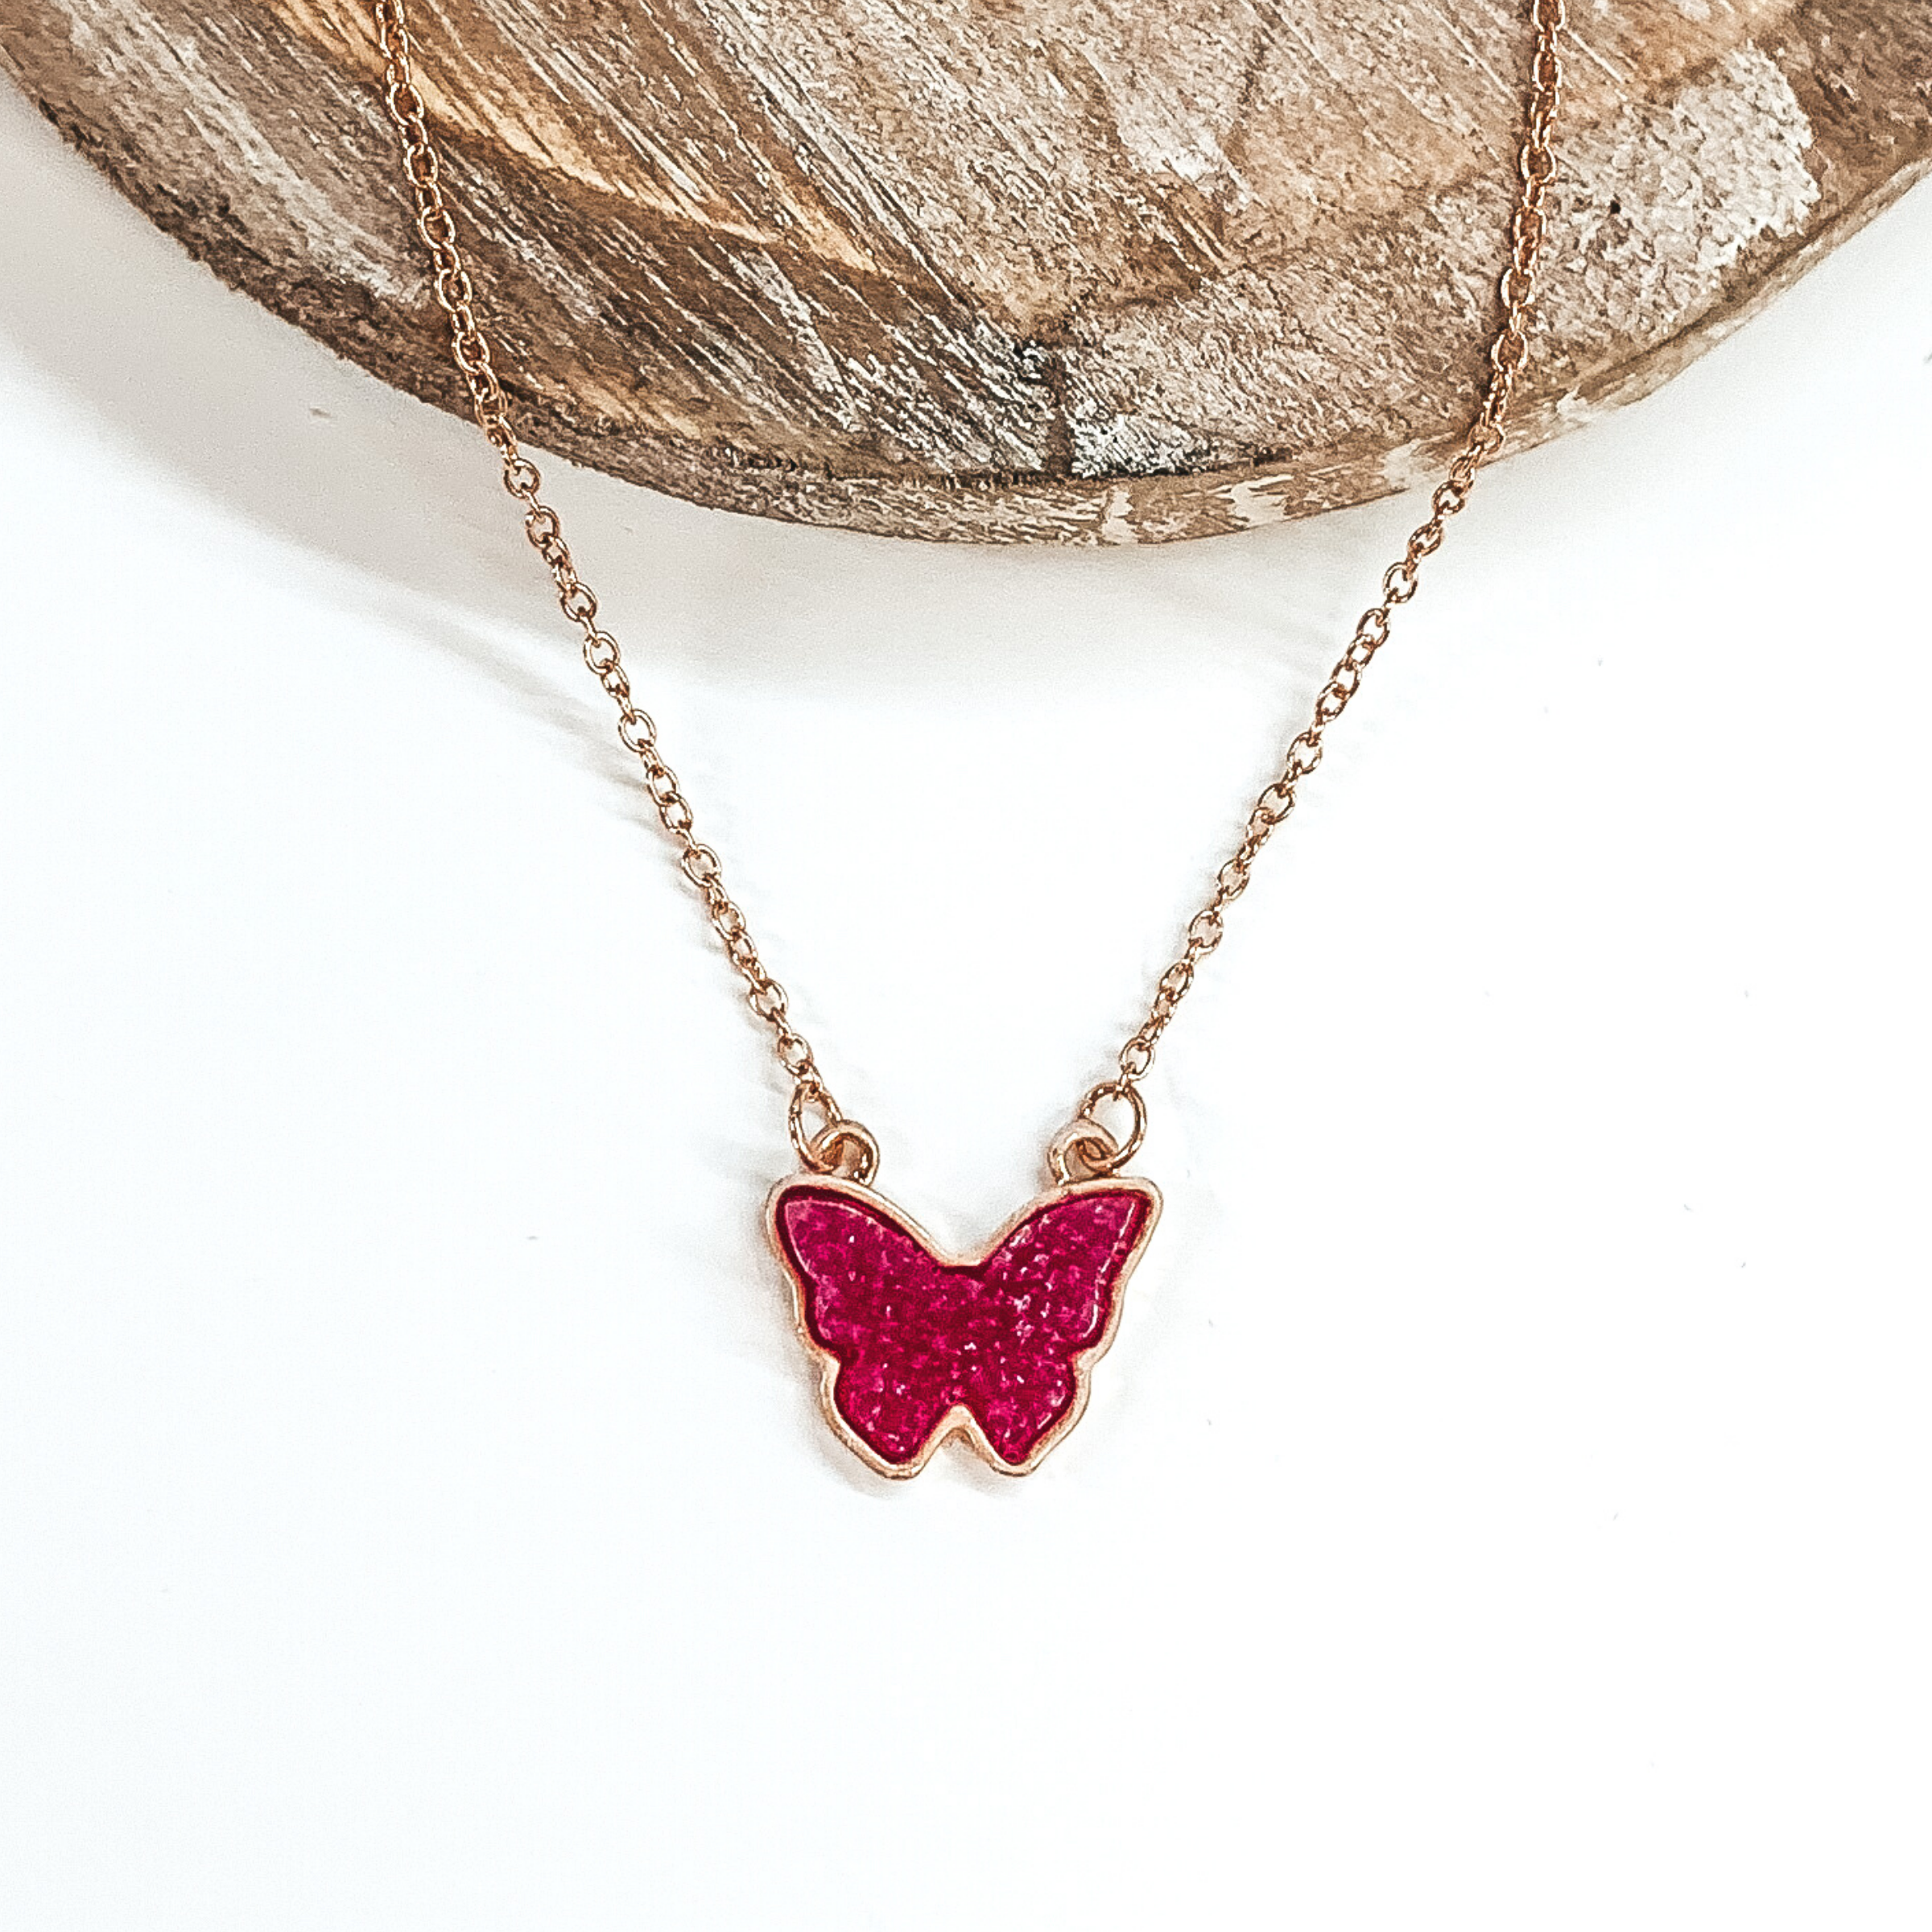 Tiny gold chained necklace includes a fuchsia, druzy butterfly pendant that is outlined in gold. This necklace is pictured on a white background with a tan piece of wood at the top of the picture.